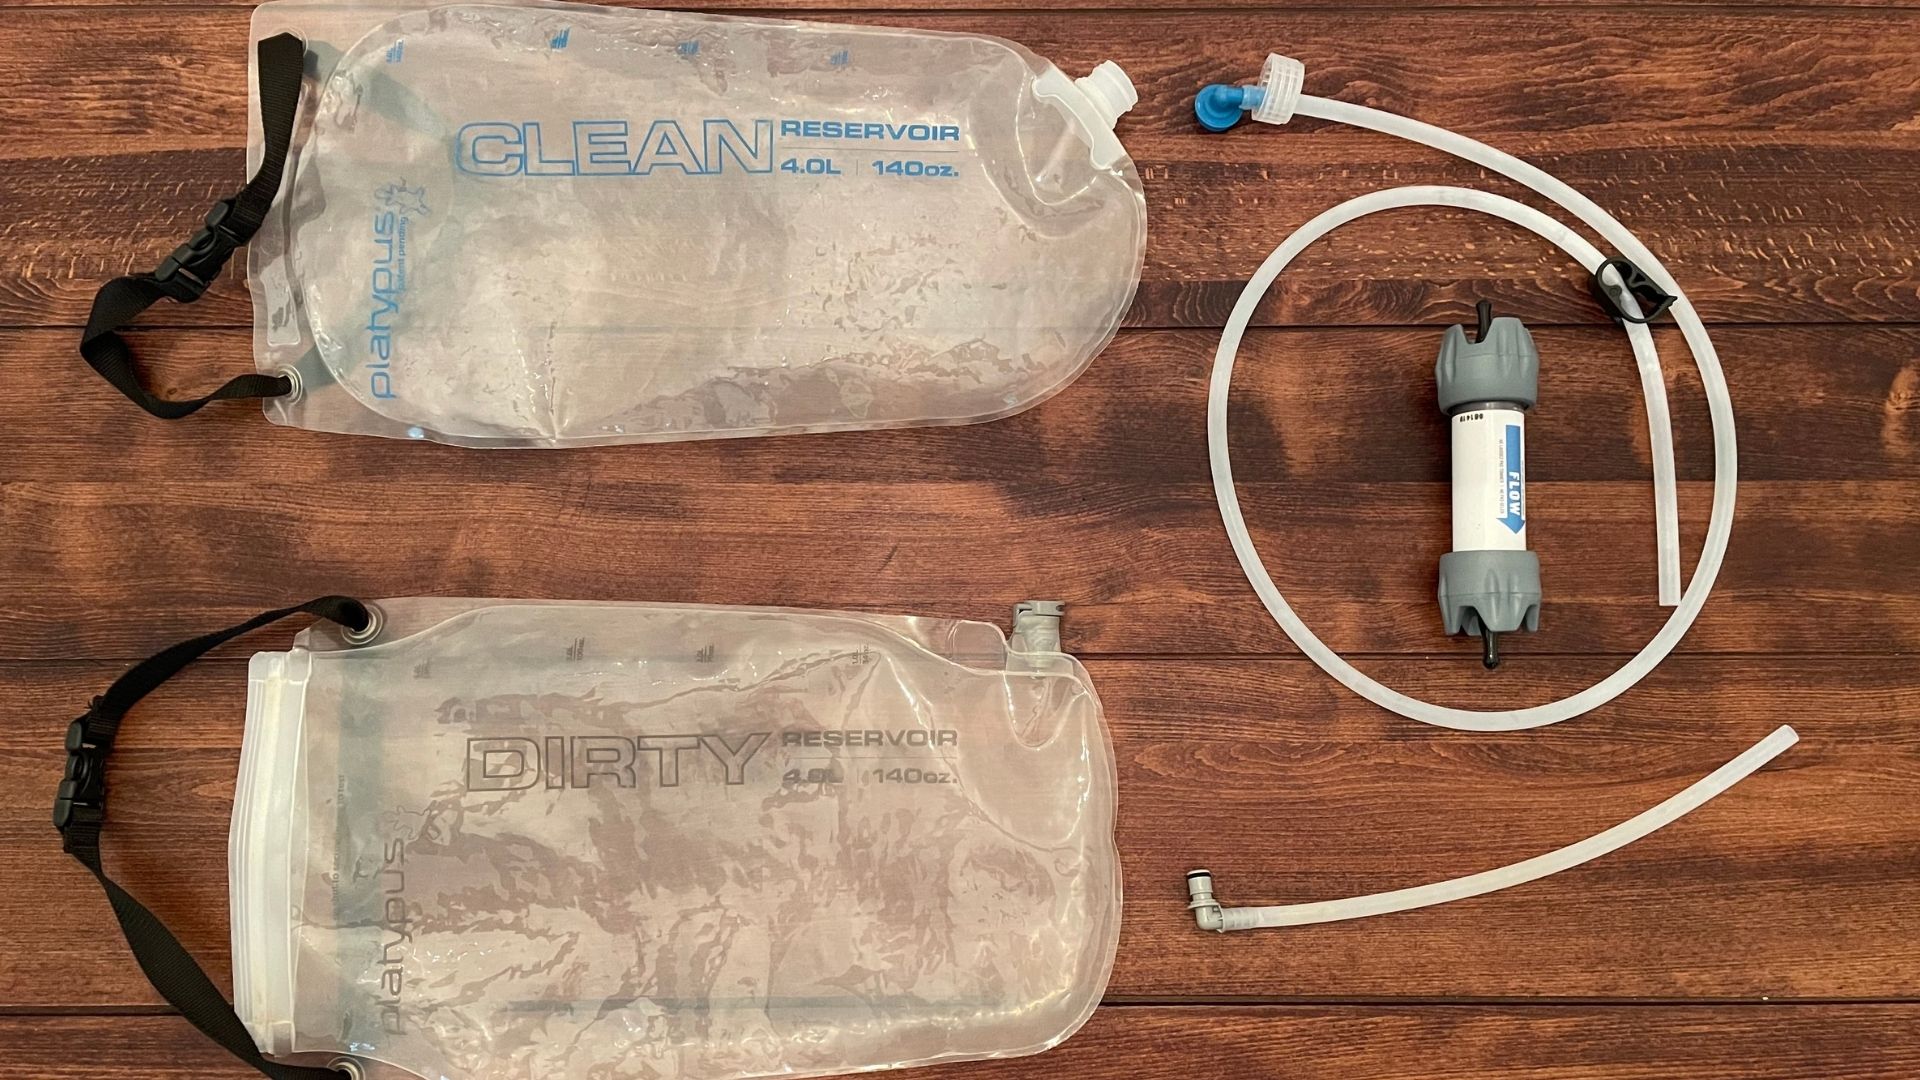 Platypus GravityWorks 4L water filter